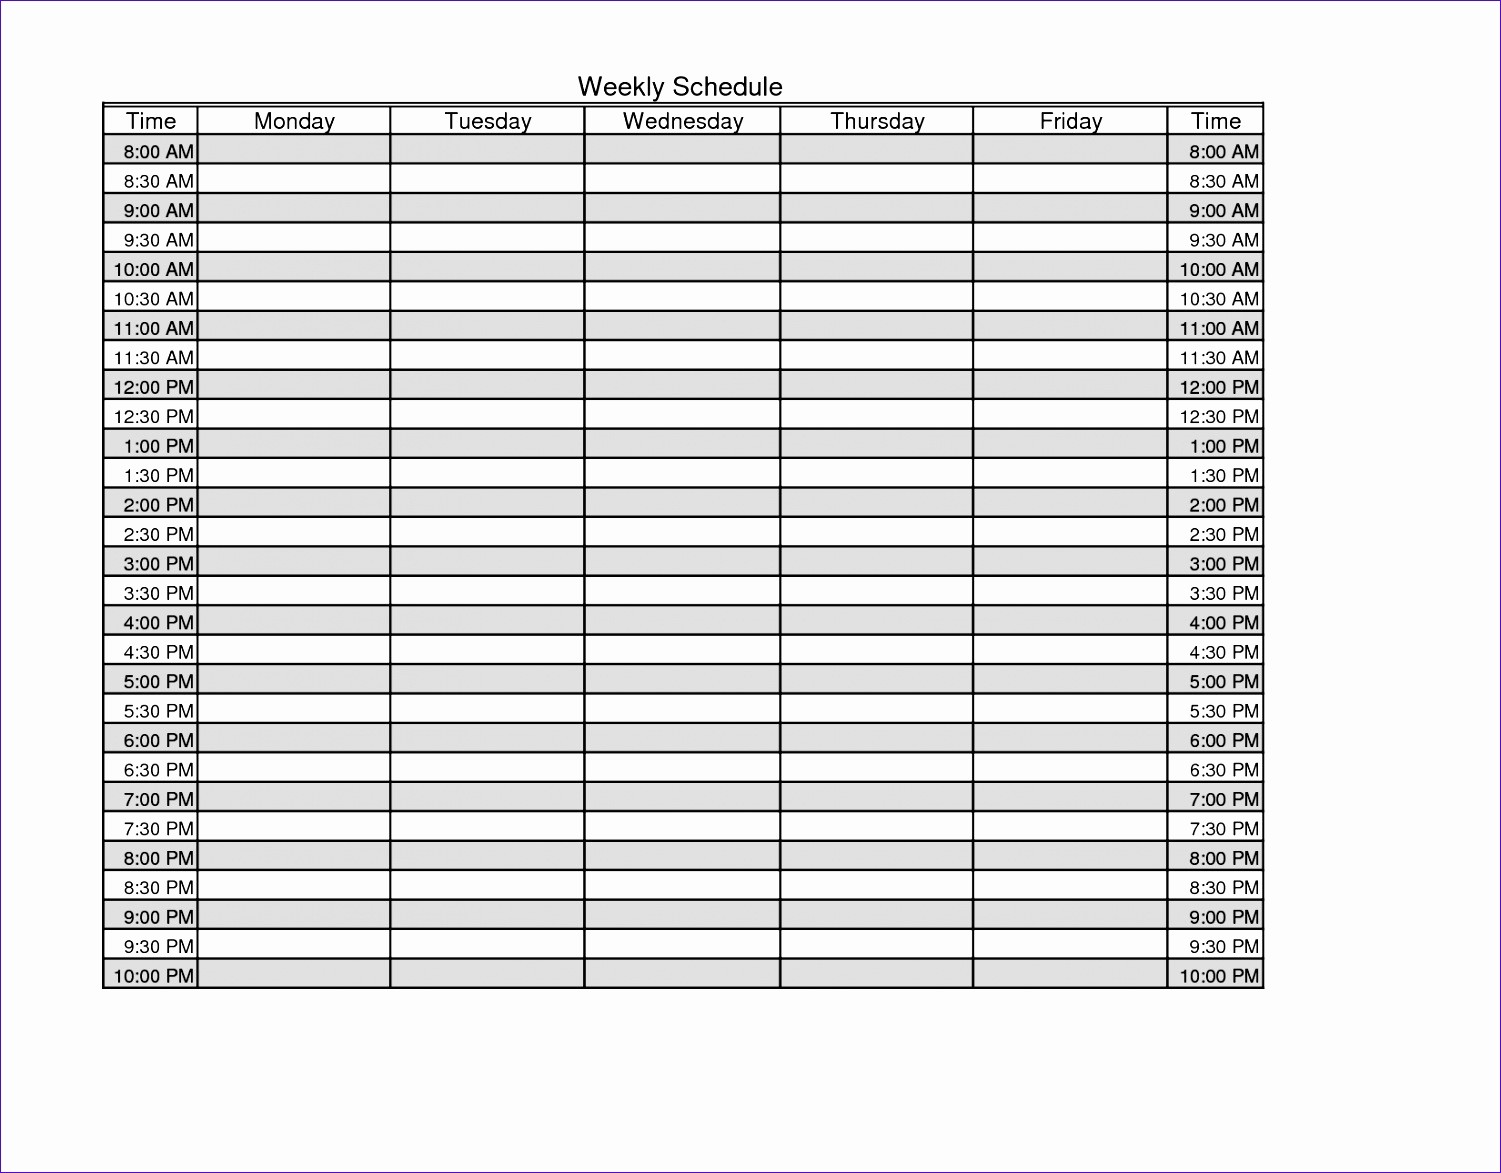 Microsoft Excel Weekly Schedule Template Beautiful 10 Microsoft Excel Weekly Schedule Template